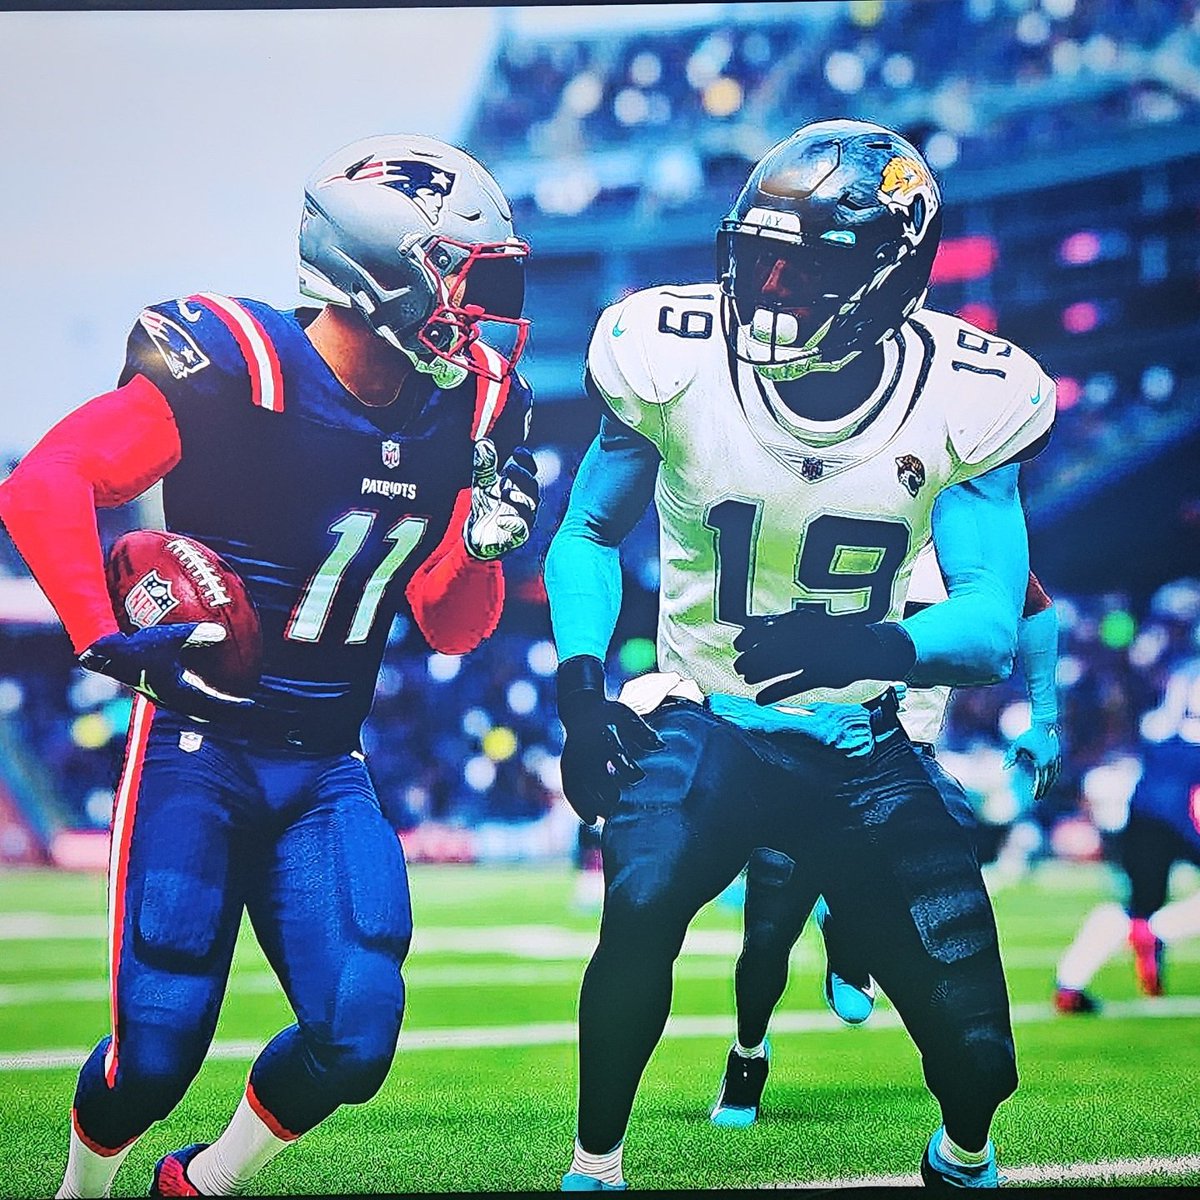 This may be my Rookie Season, but I'm already reminding the Defensive Backs why I AM still the #NewEnglandChampion! Here I am talking some smack to this Defensive Player as I blow past him. 
#Madden22 Franchise Mode